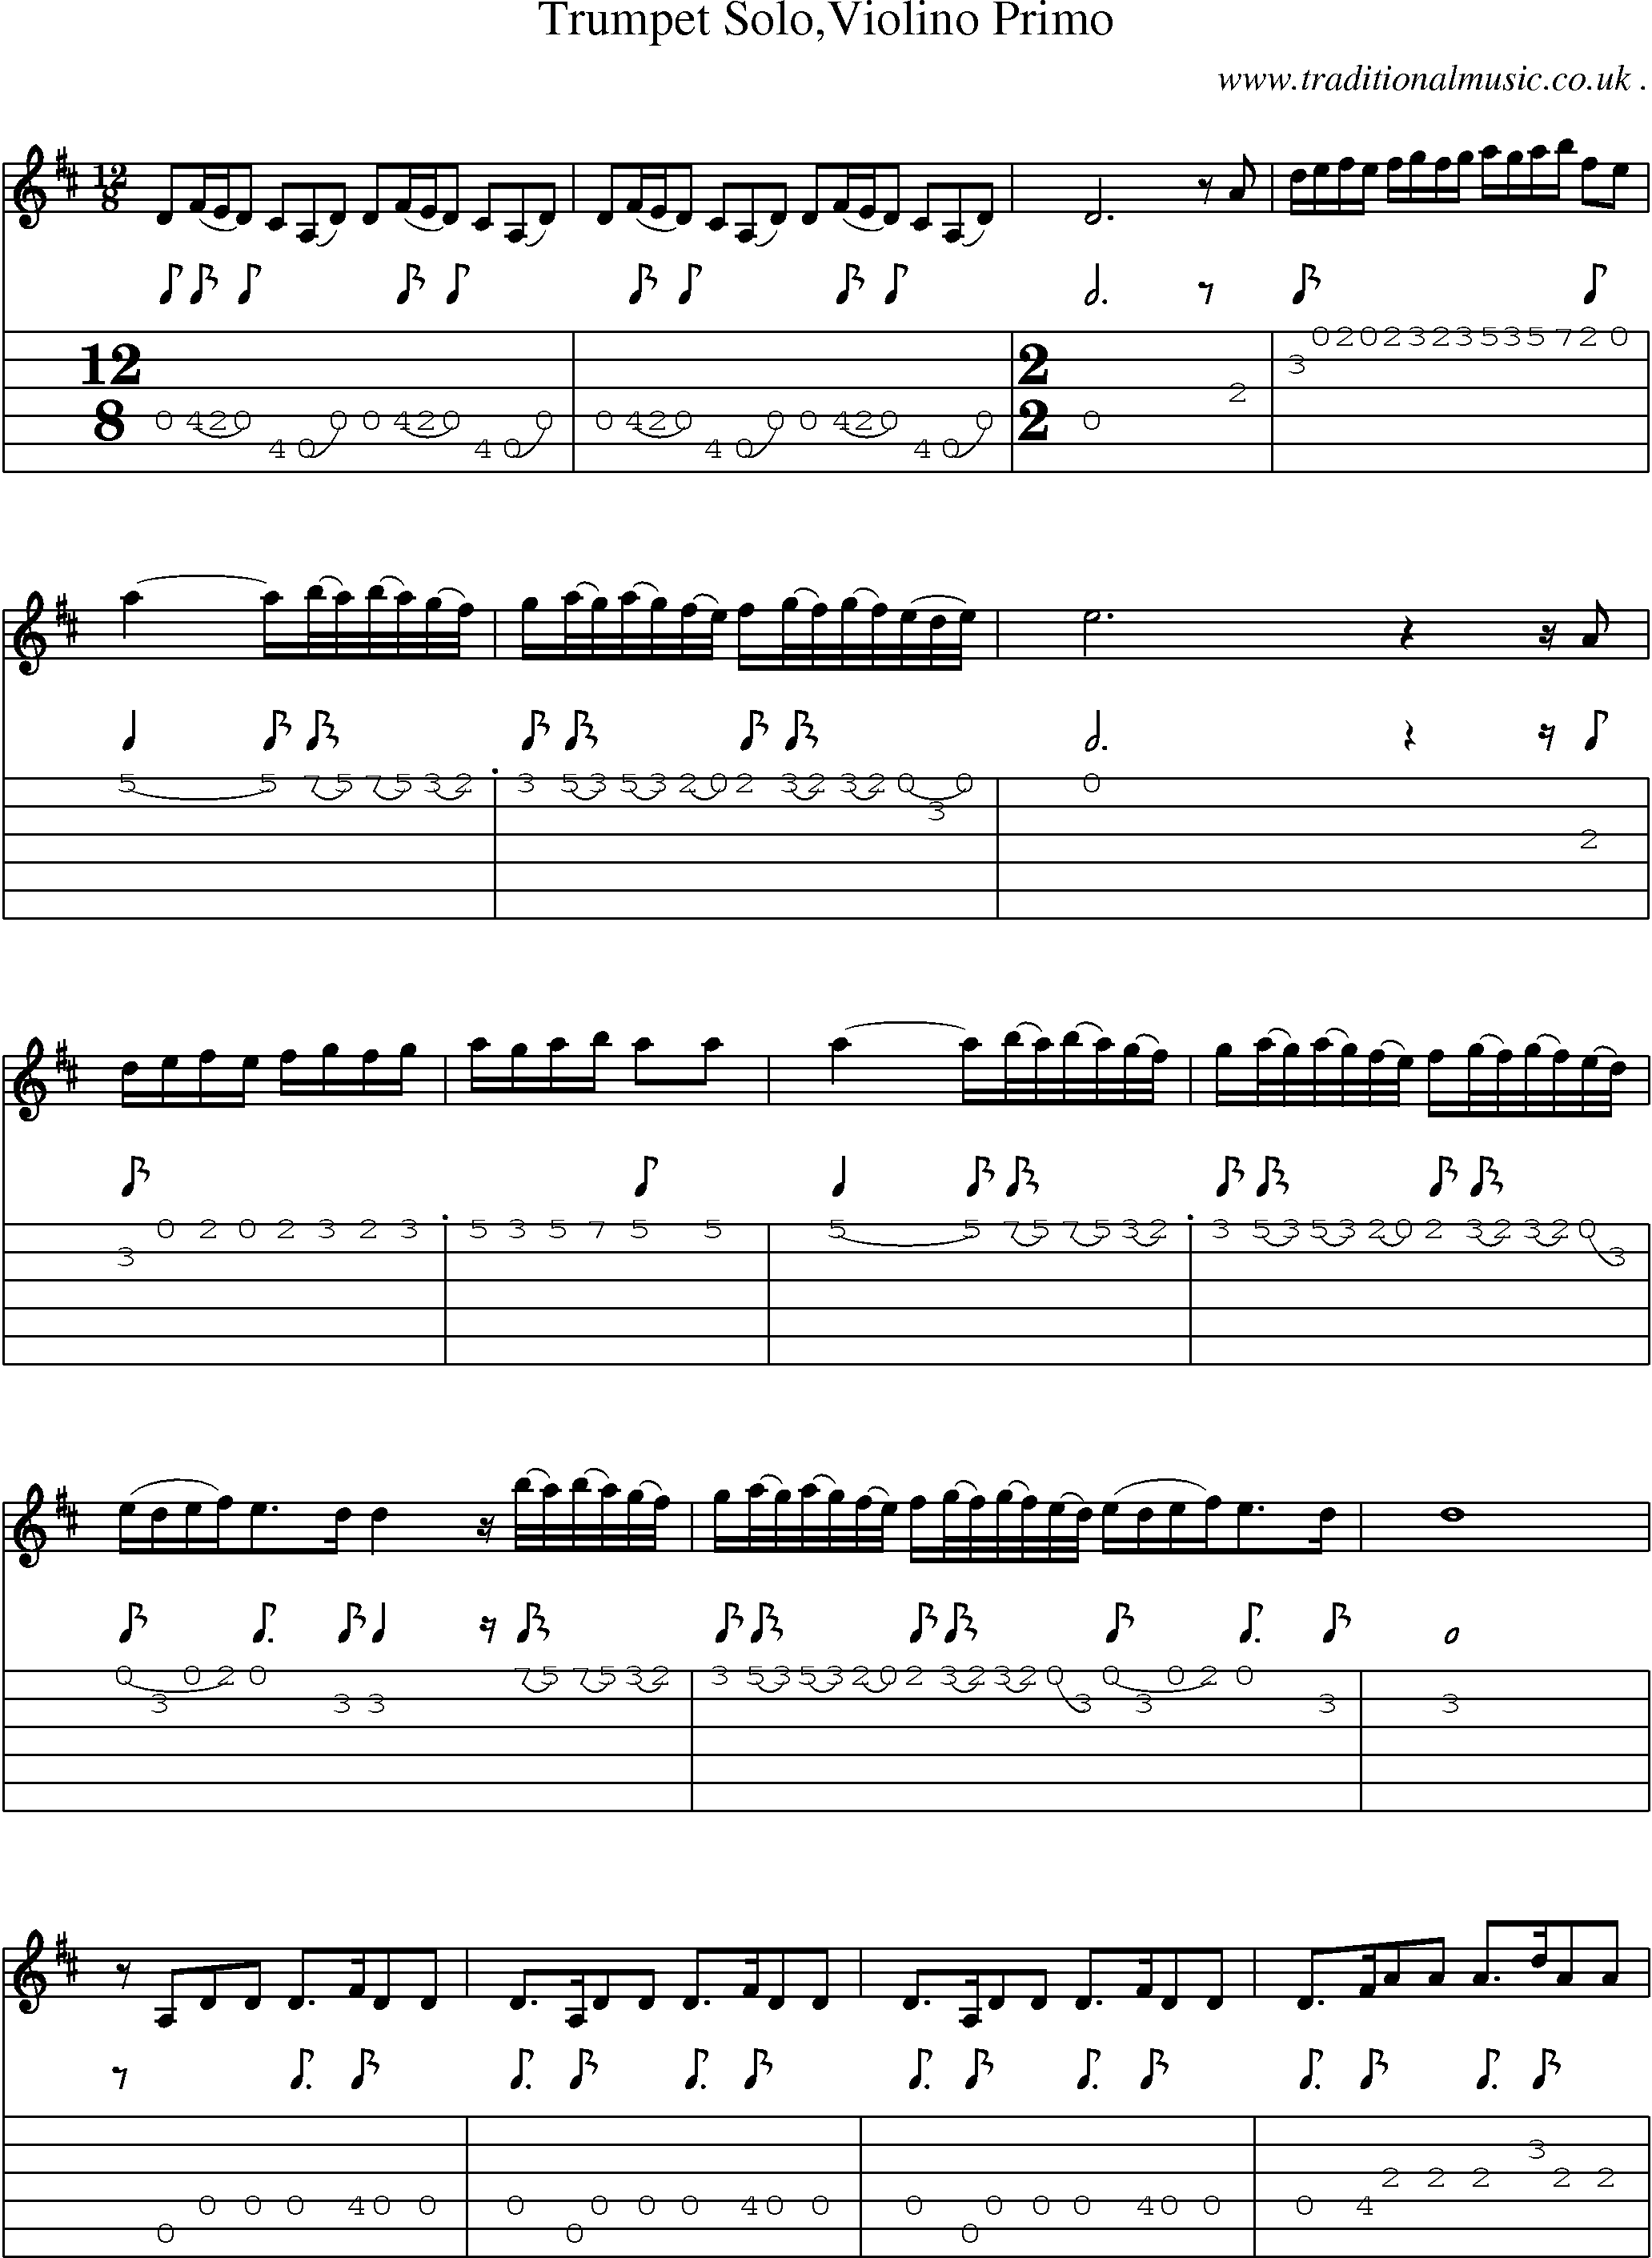 Sheet-Music and Guitar Tabs for Trumpet Soloviolino Primo